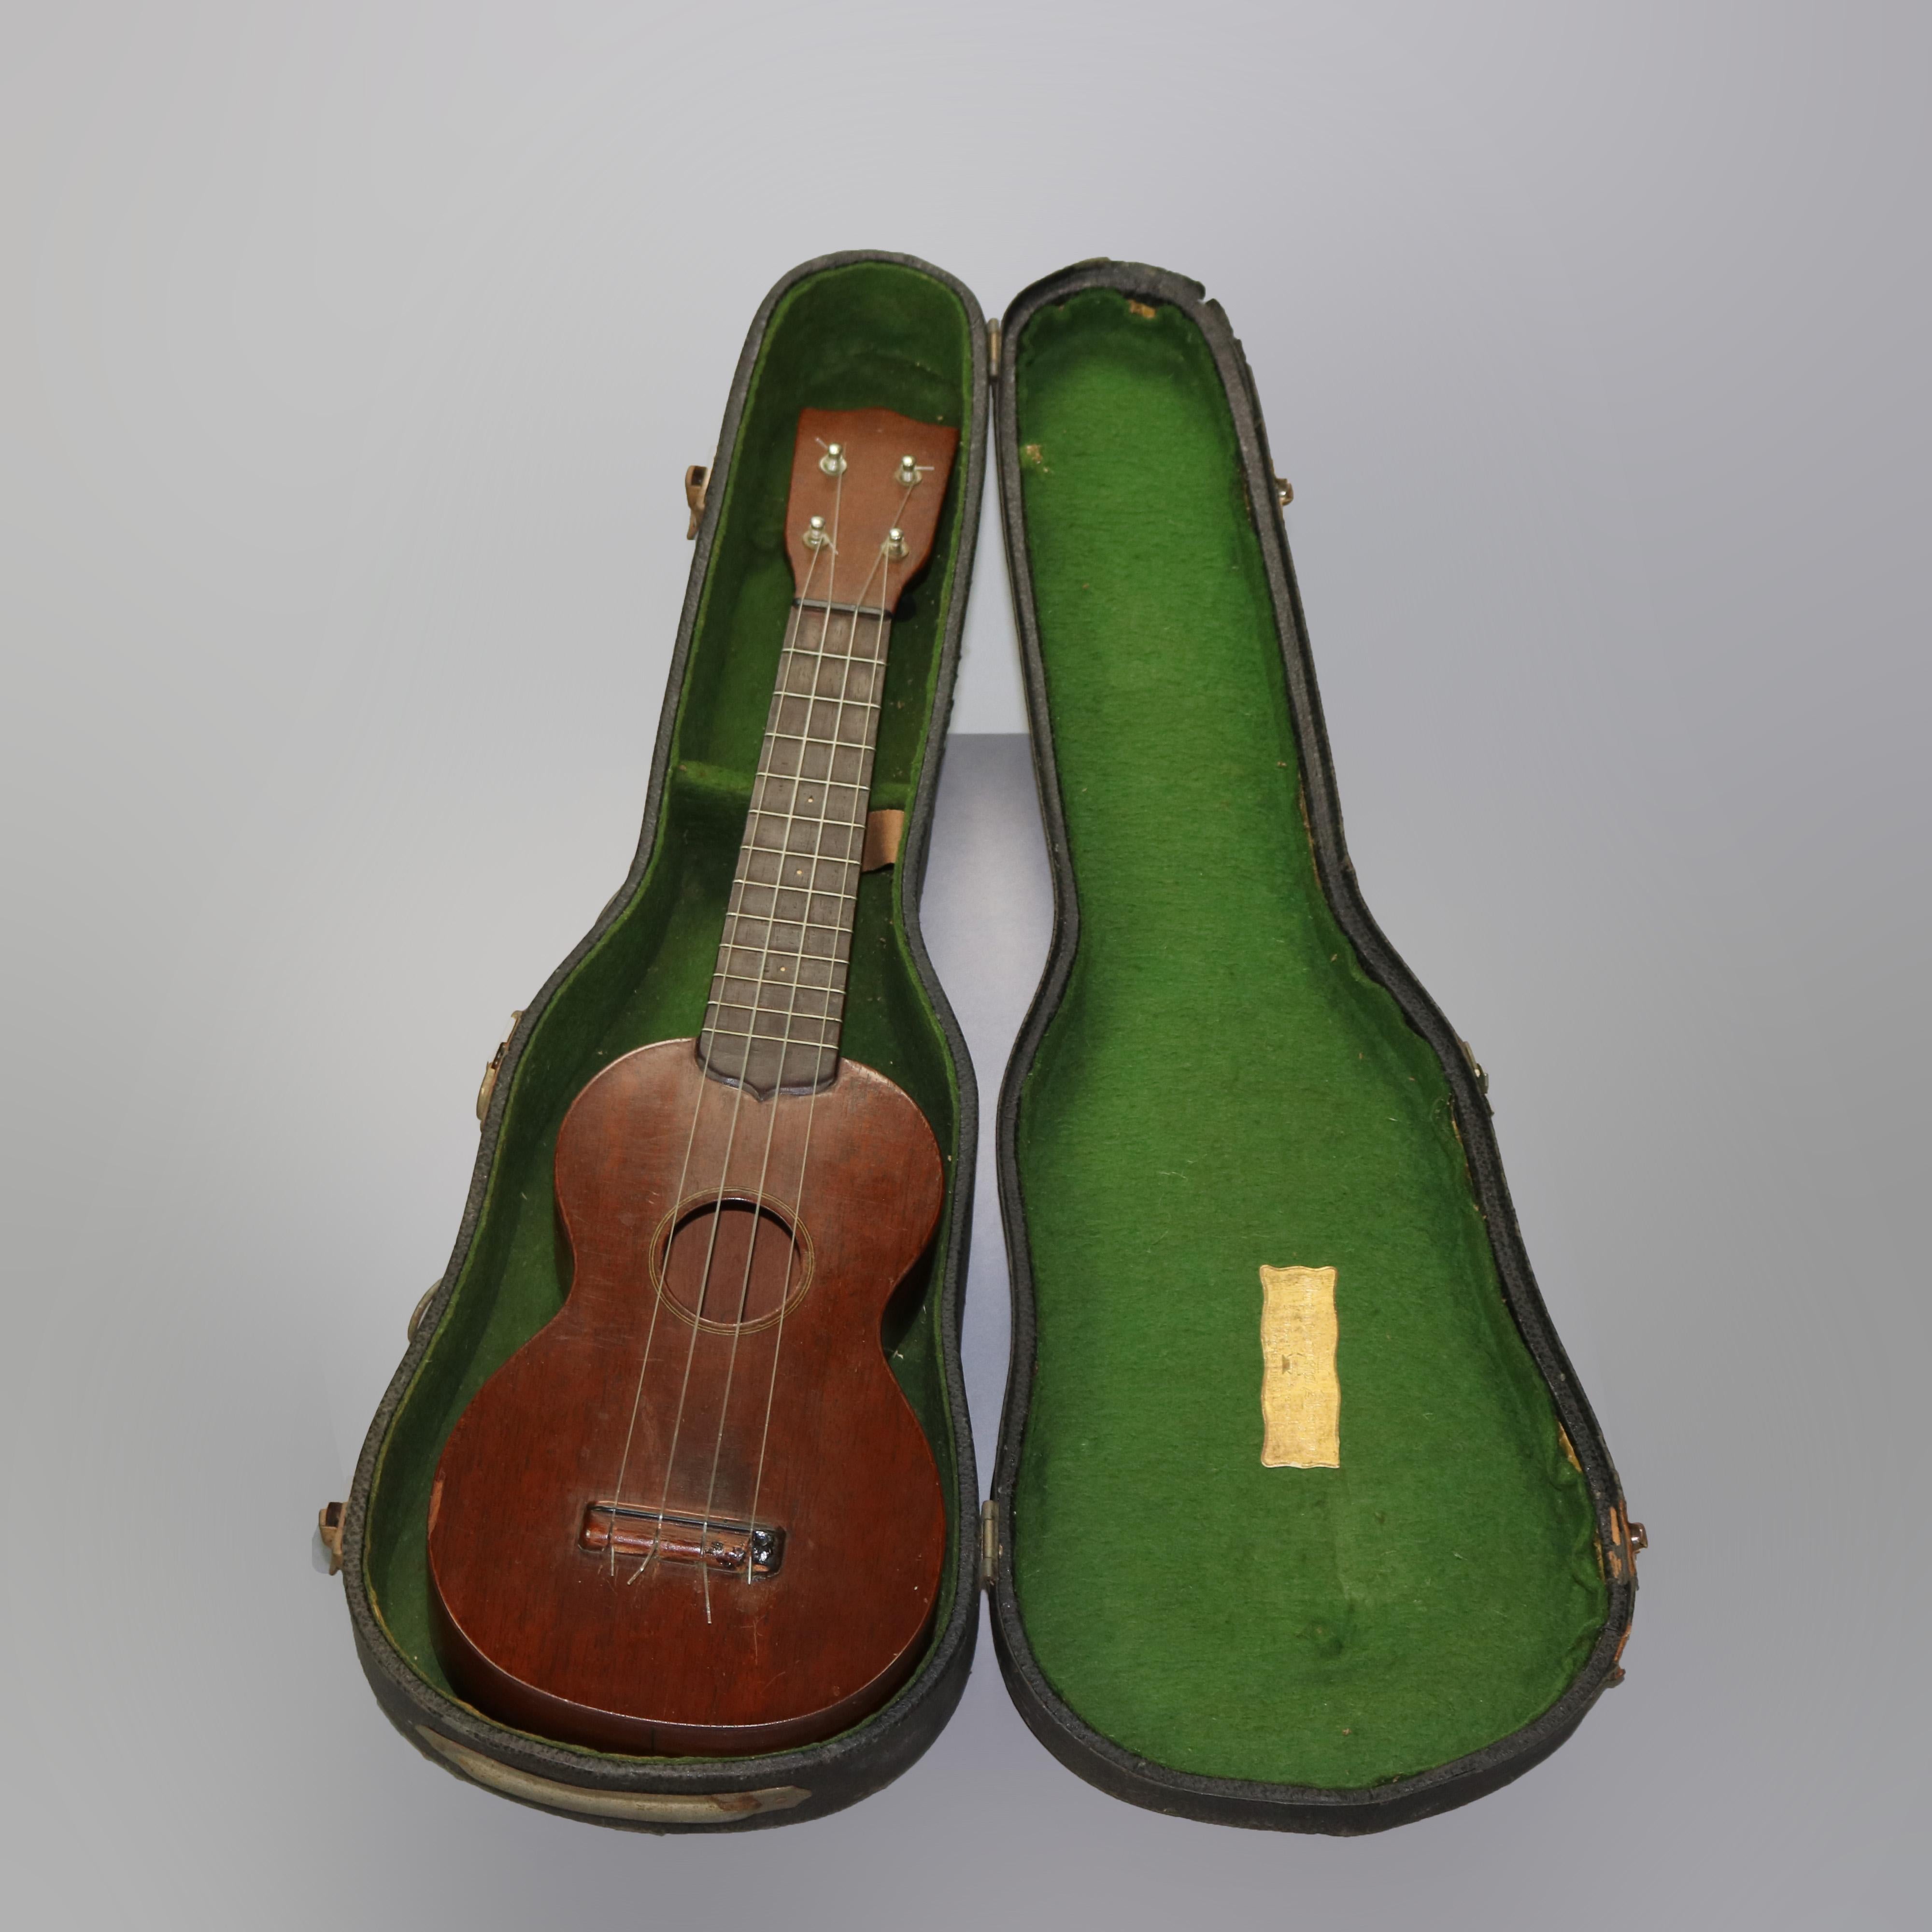 A vintage uke by C.F. Martin & Co. offers mahogany construction and case, en verso maker signed as photographed, (string instrument, guitar), 20th century 

Measures - Ukulele 21'' long x 6.25'' widest x 2.5''deep; Case 8'' x 22.5'' x 3.5''.